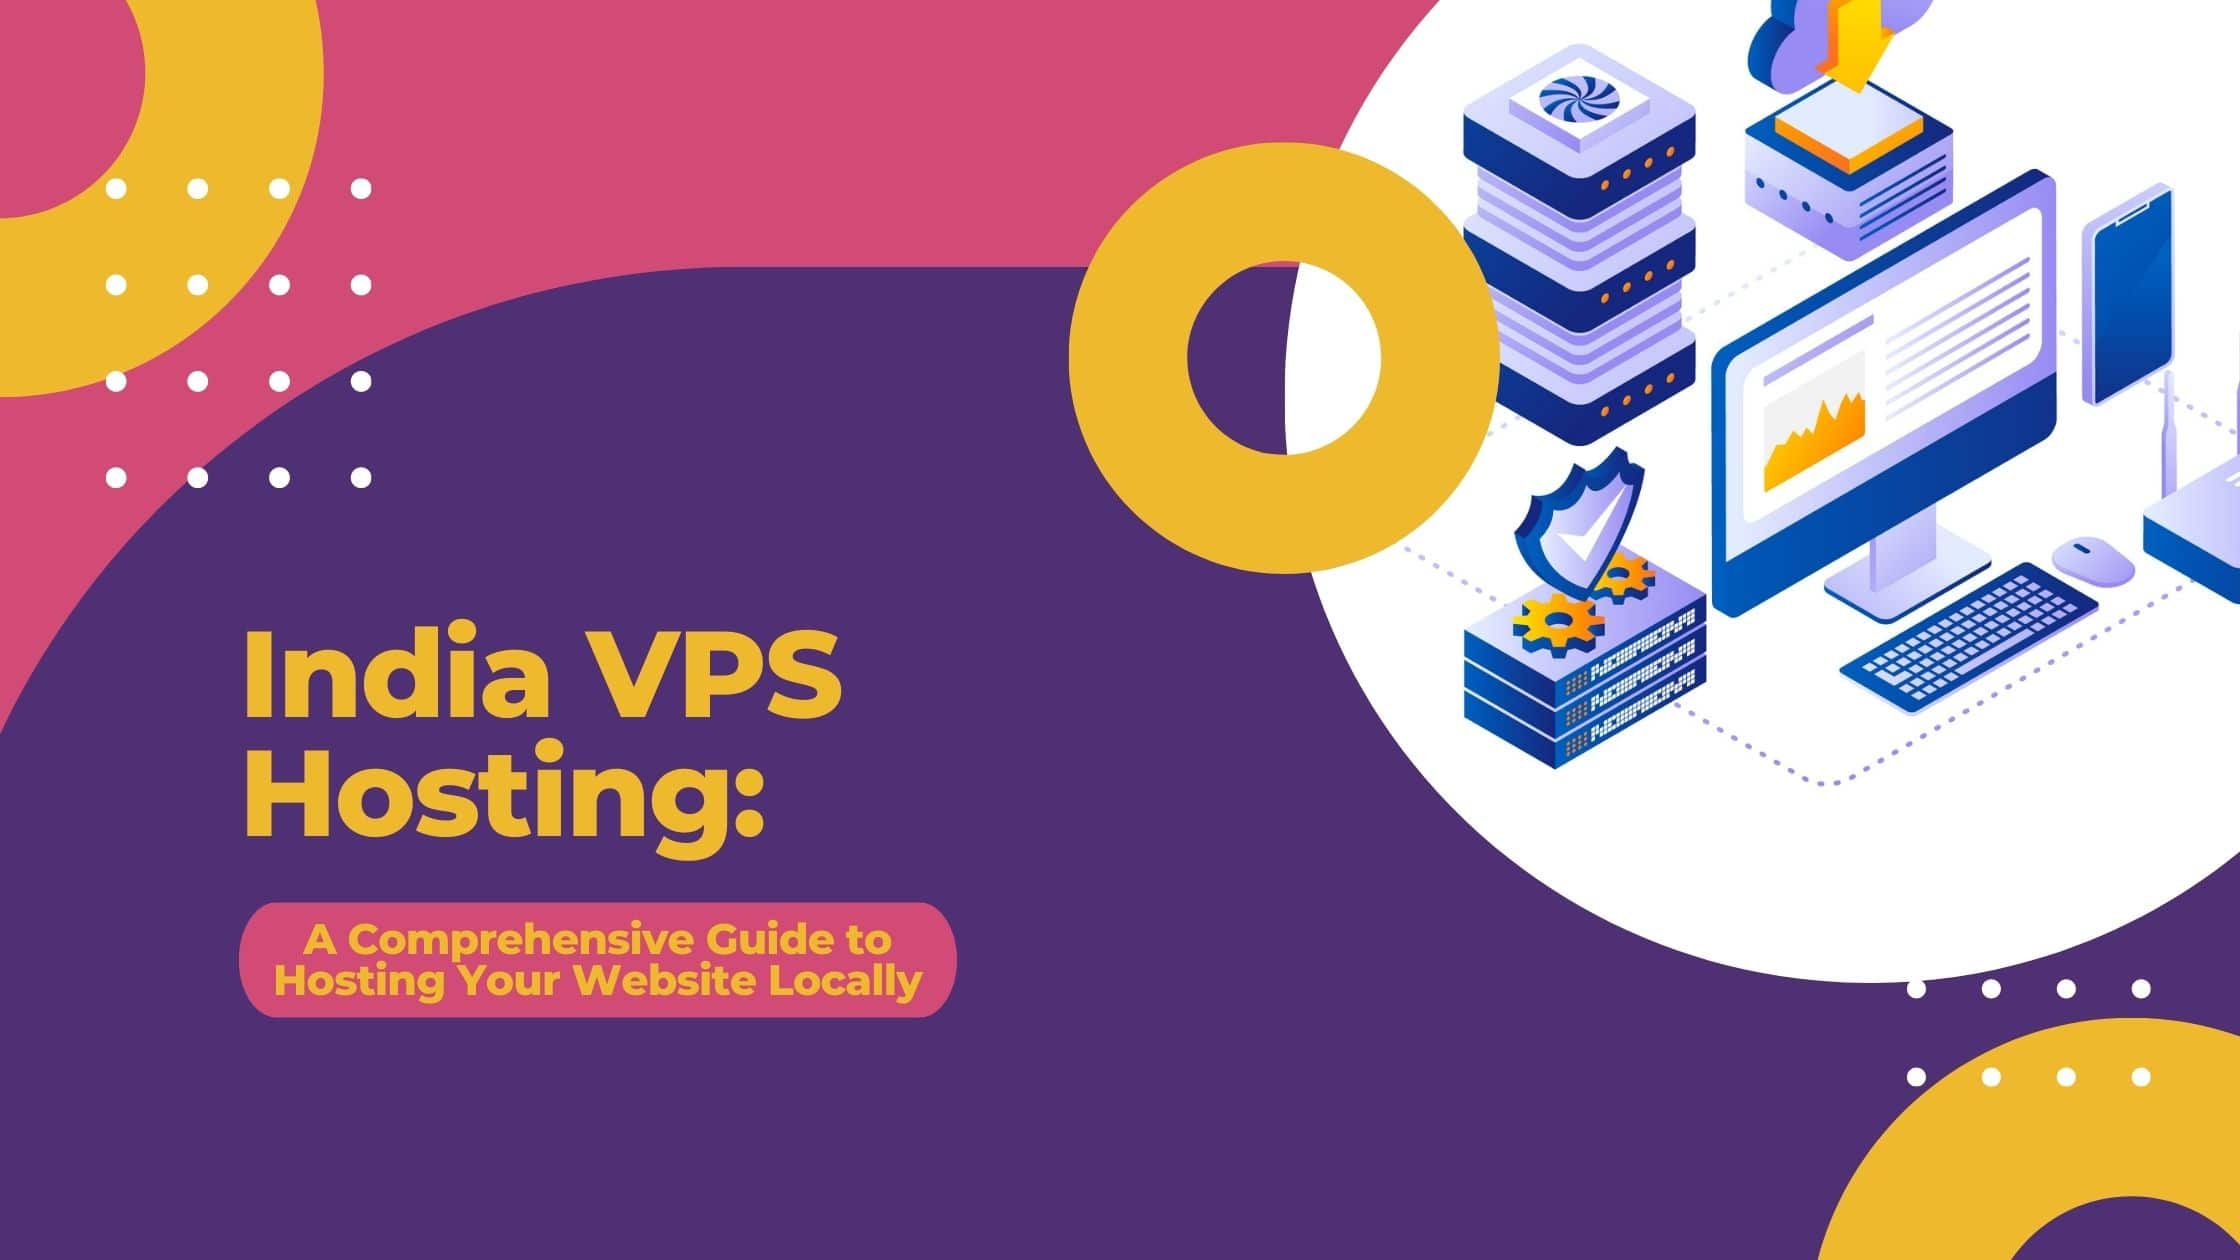 India VPS Hosting: A Comprehensive Guide to Hosting Your Website Locally